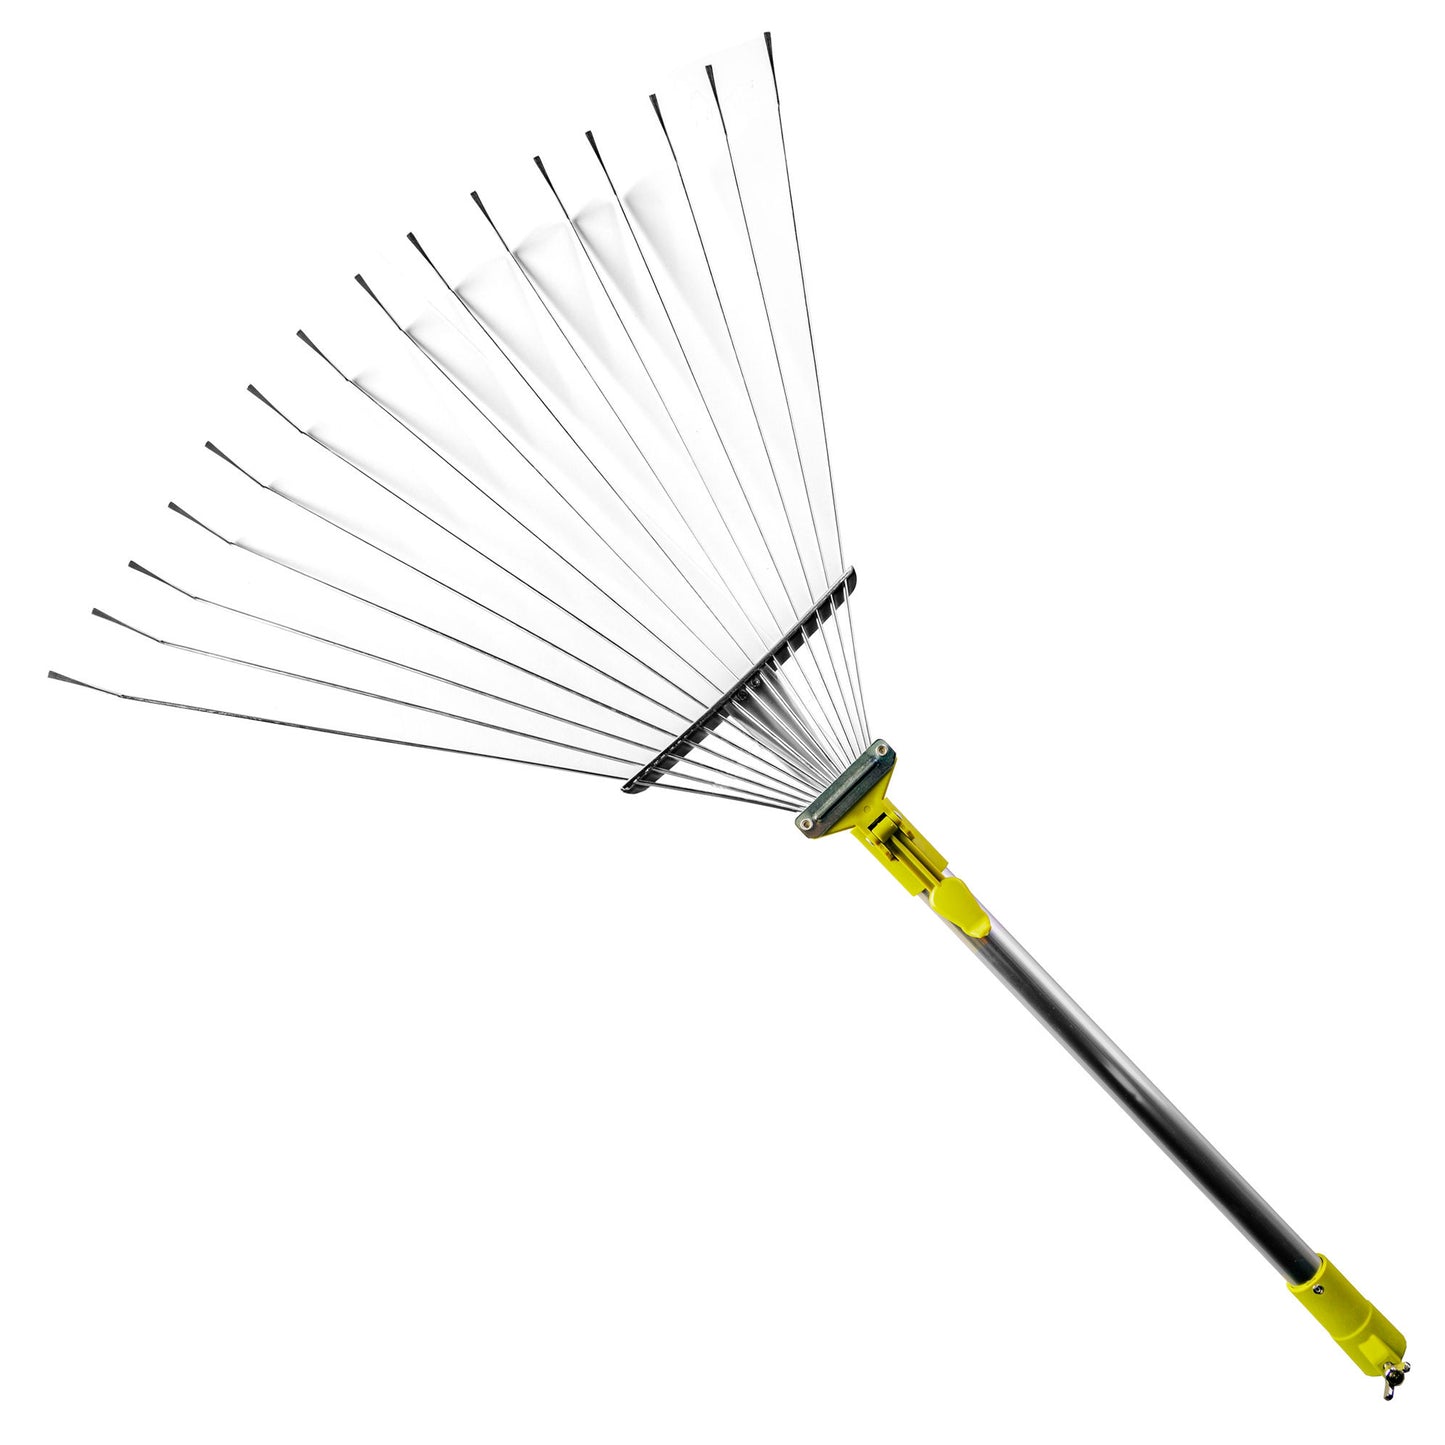 Adjustable roof rake attachment expanded